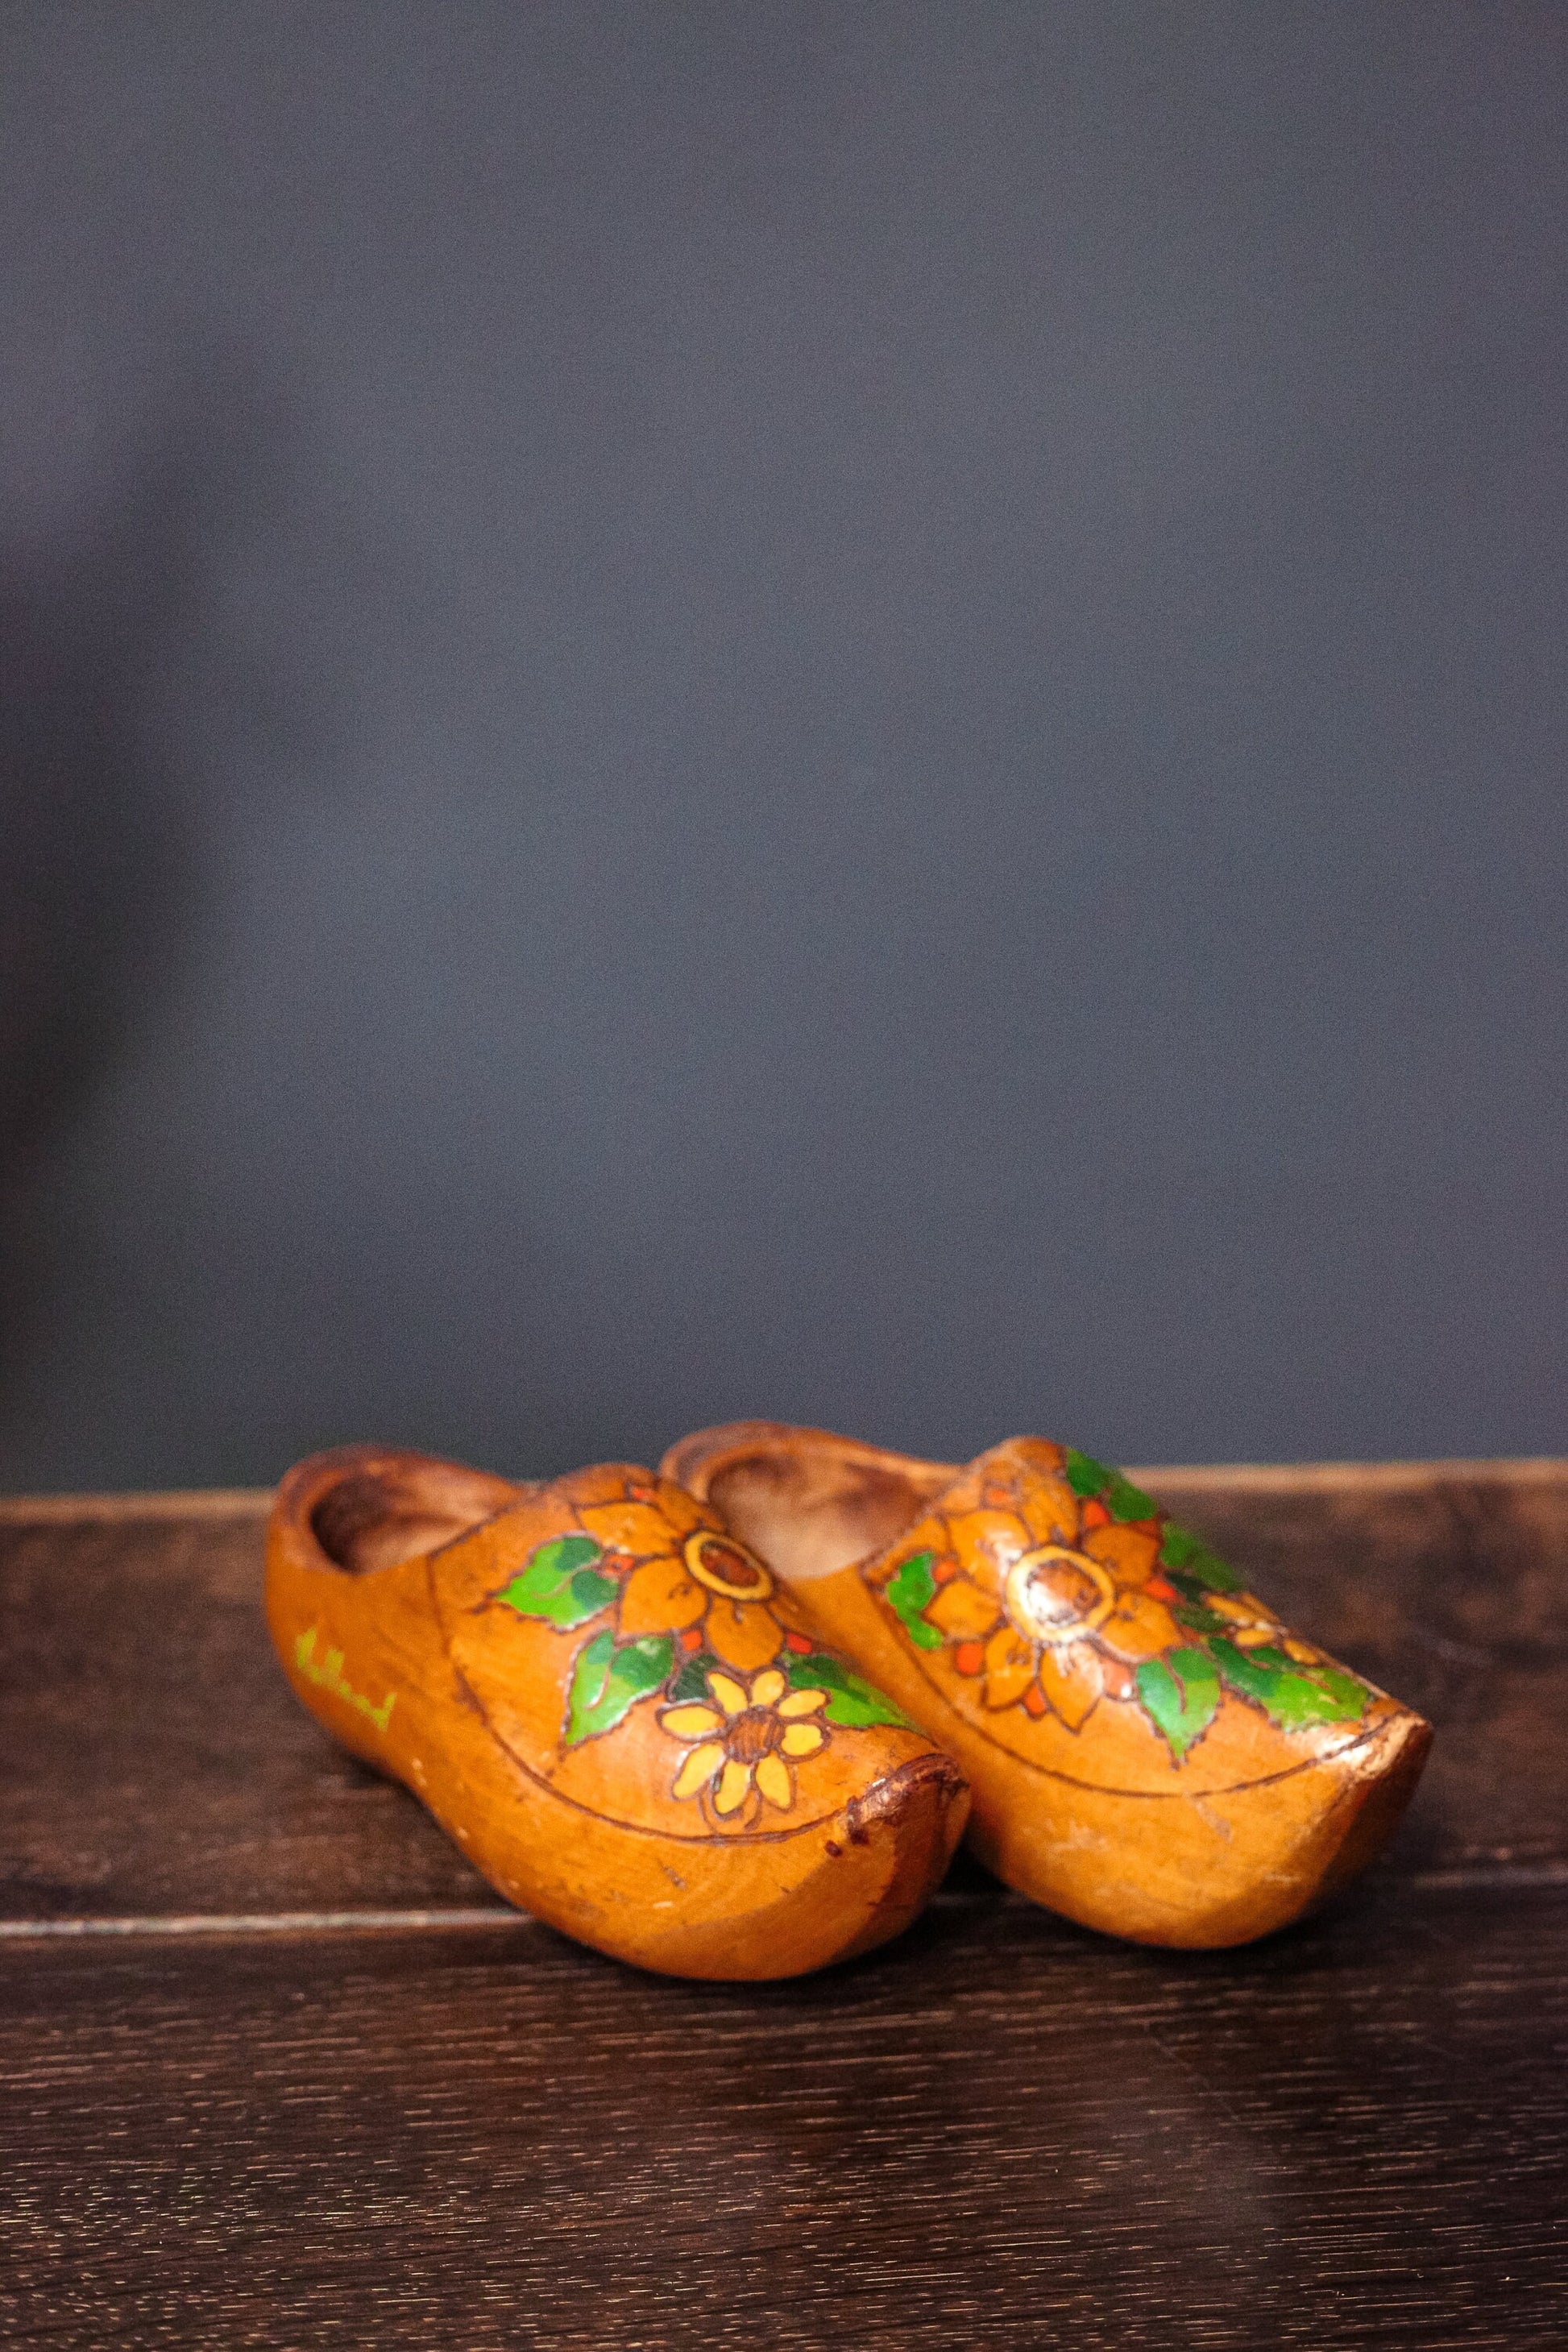 Vintage Sunflower Carved/Painted Wooden Clogs from Holland set of 2 - Pair of Dutch Sunflower Painted Wood Clogs